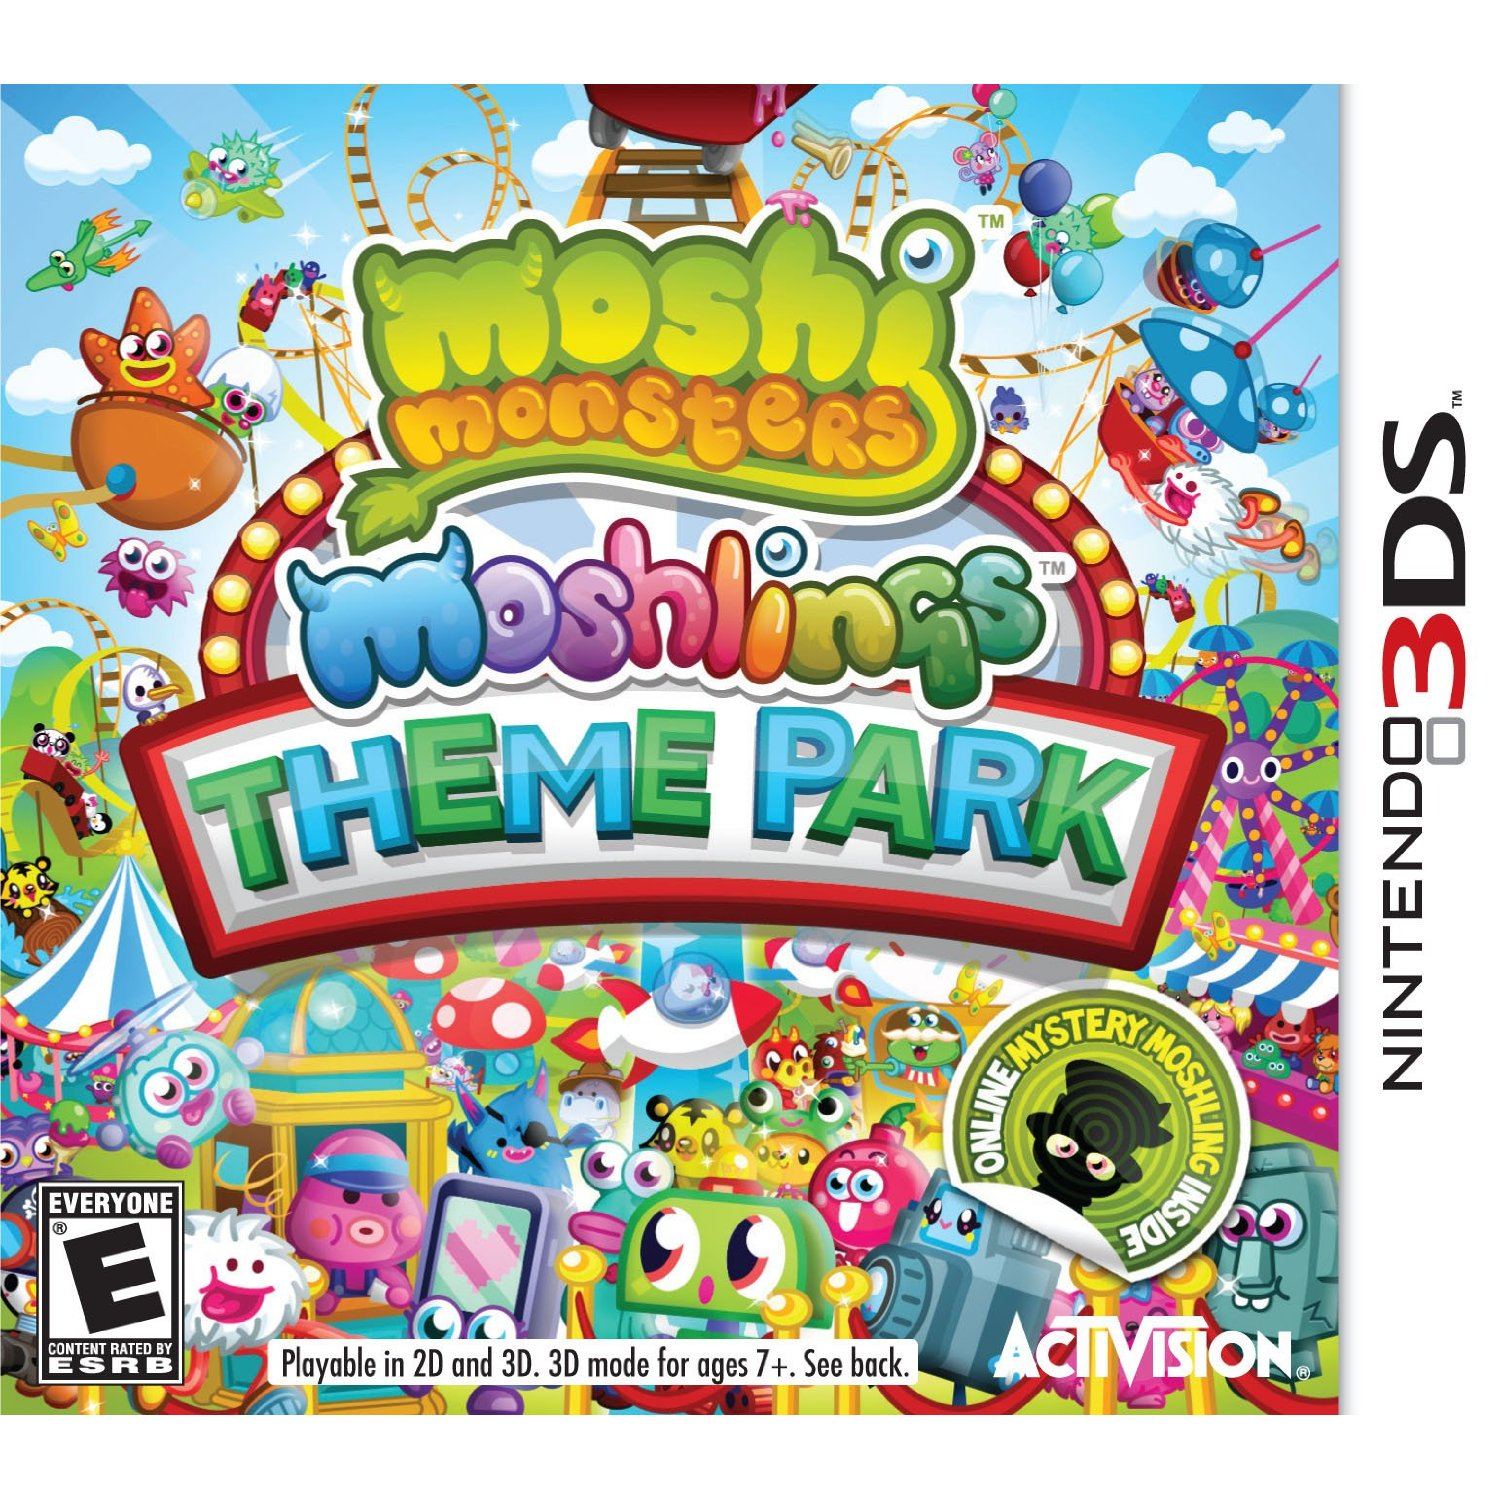 Moshi monsters moshlings theme park 3ds download